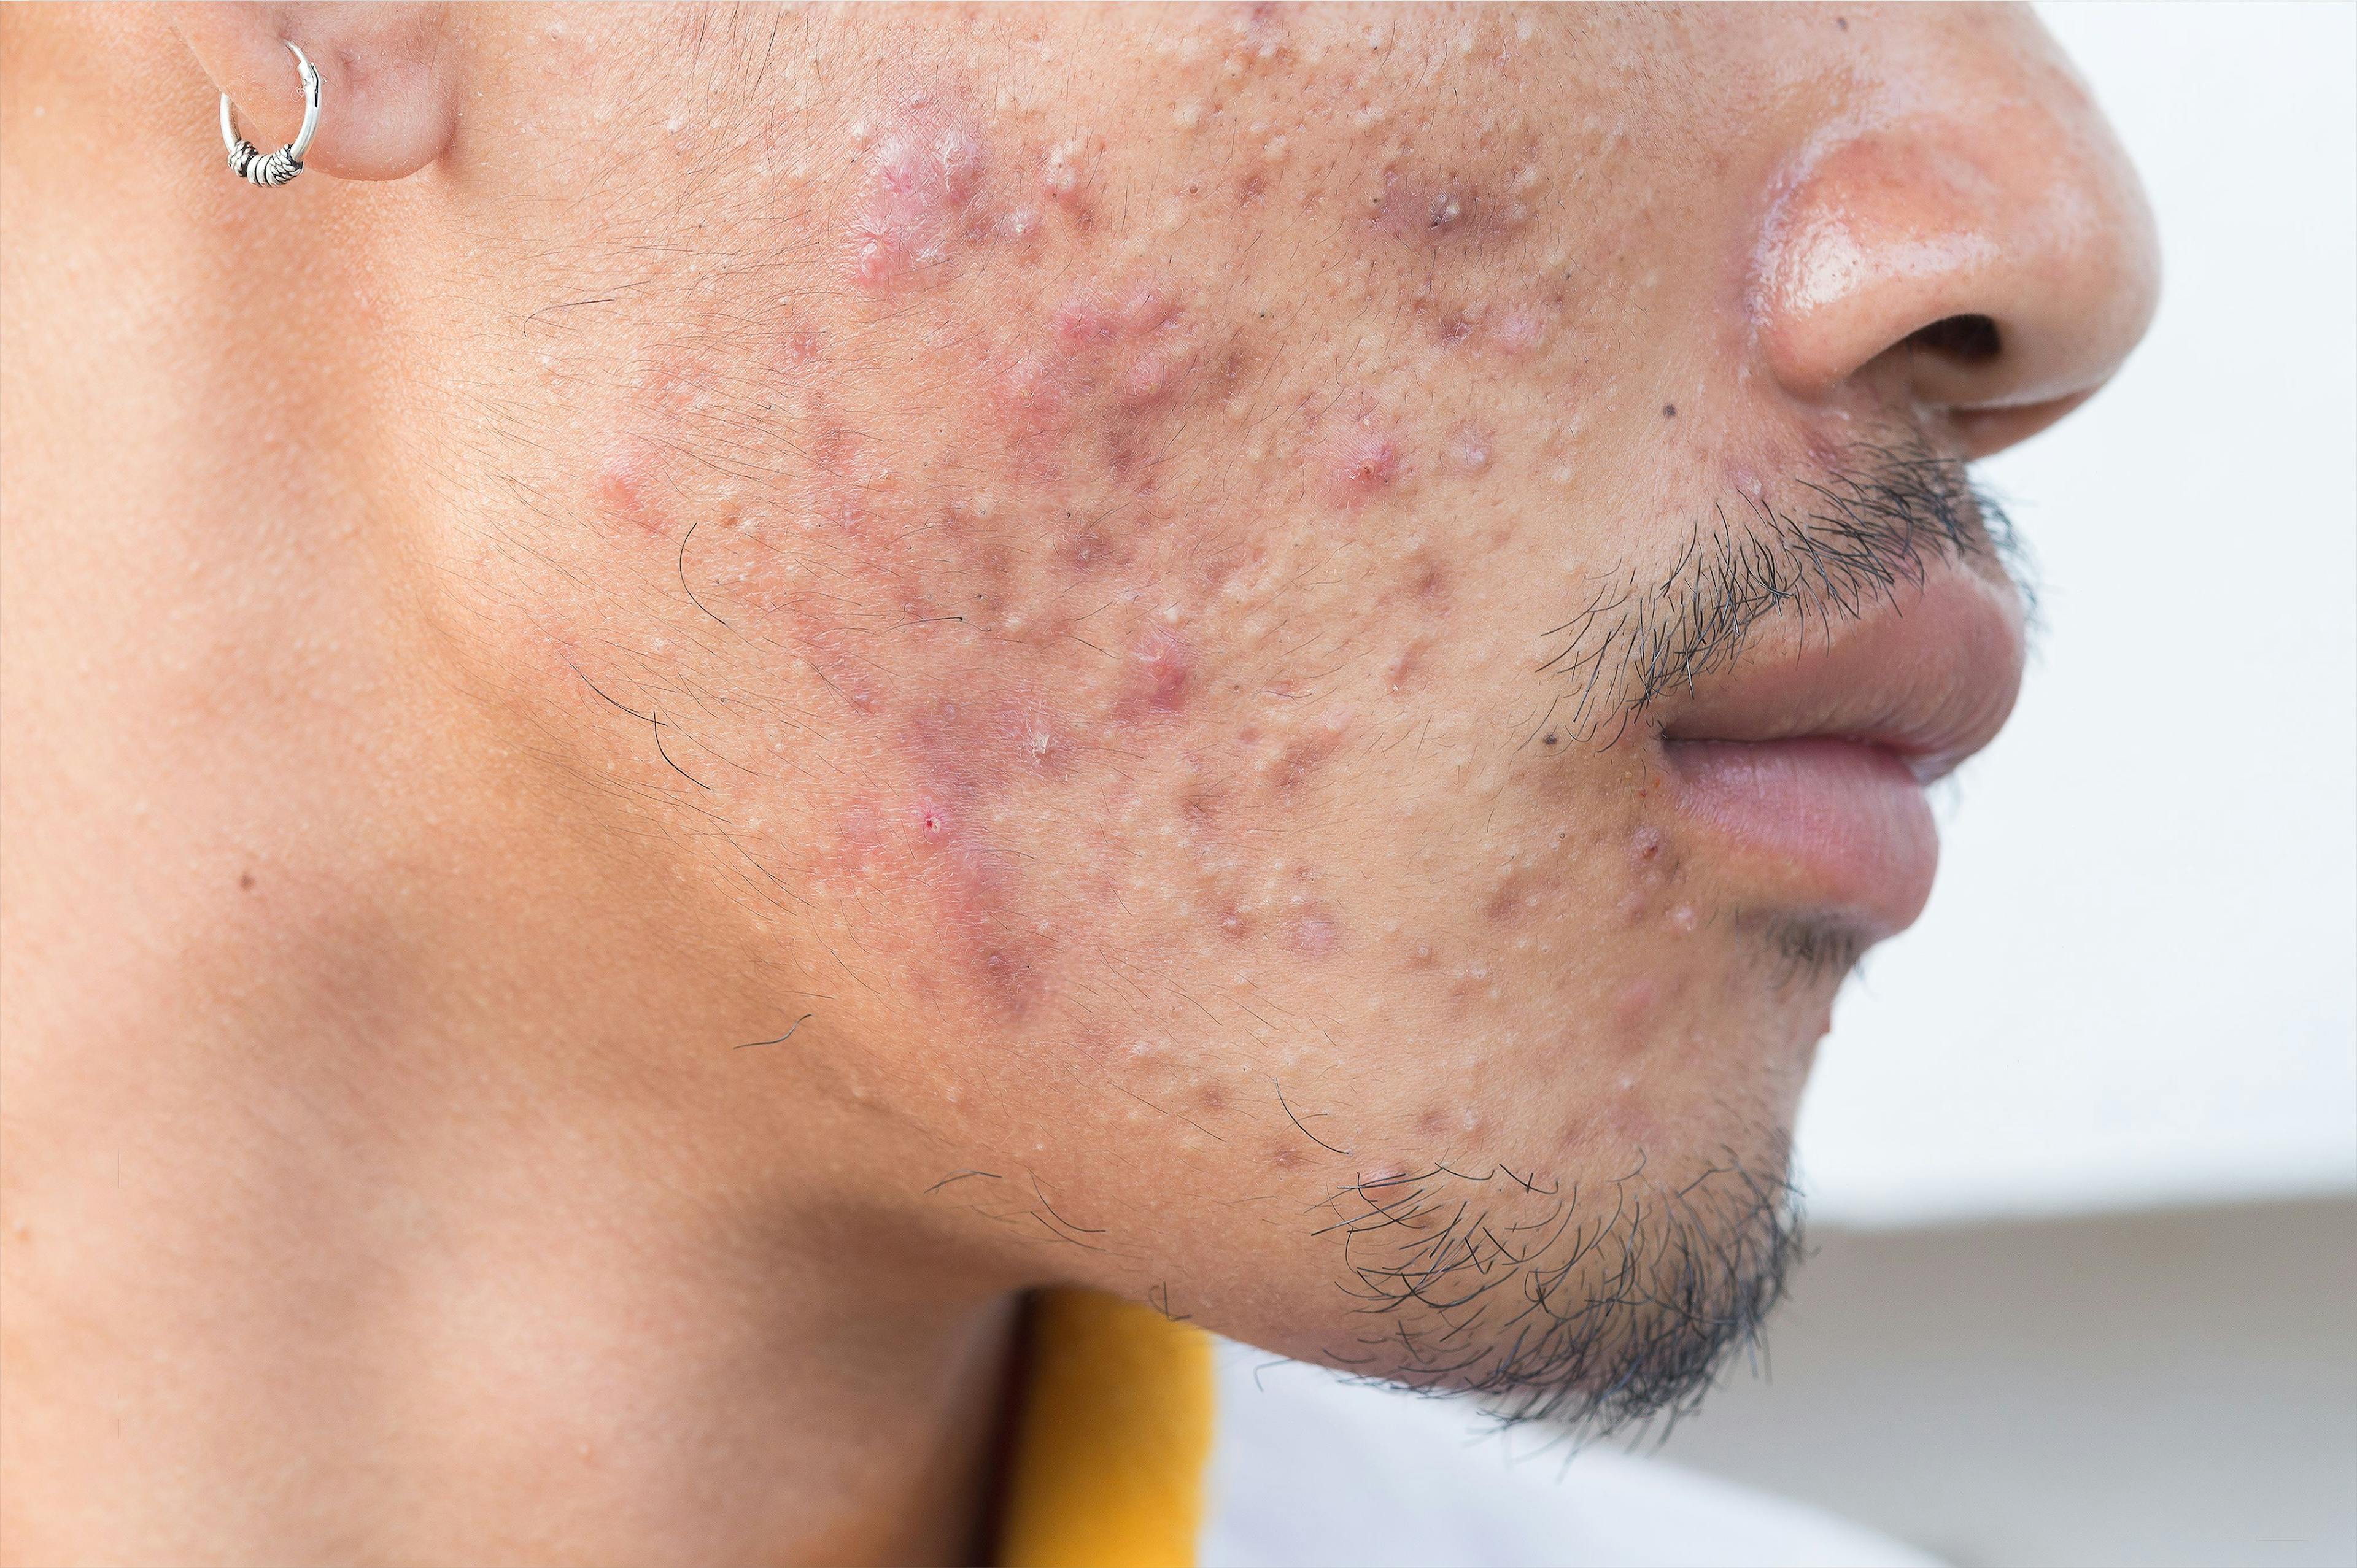 Dermatologists Post Less Than 4% of Top Acne Content on Instagram